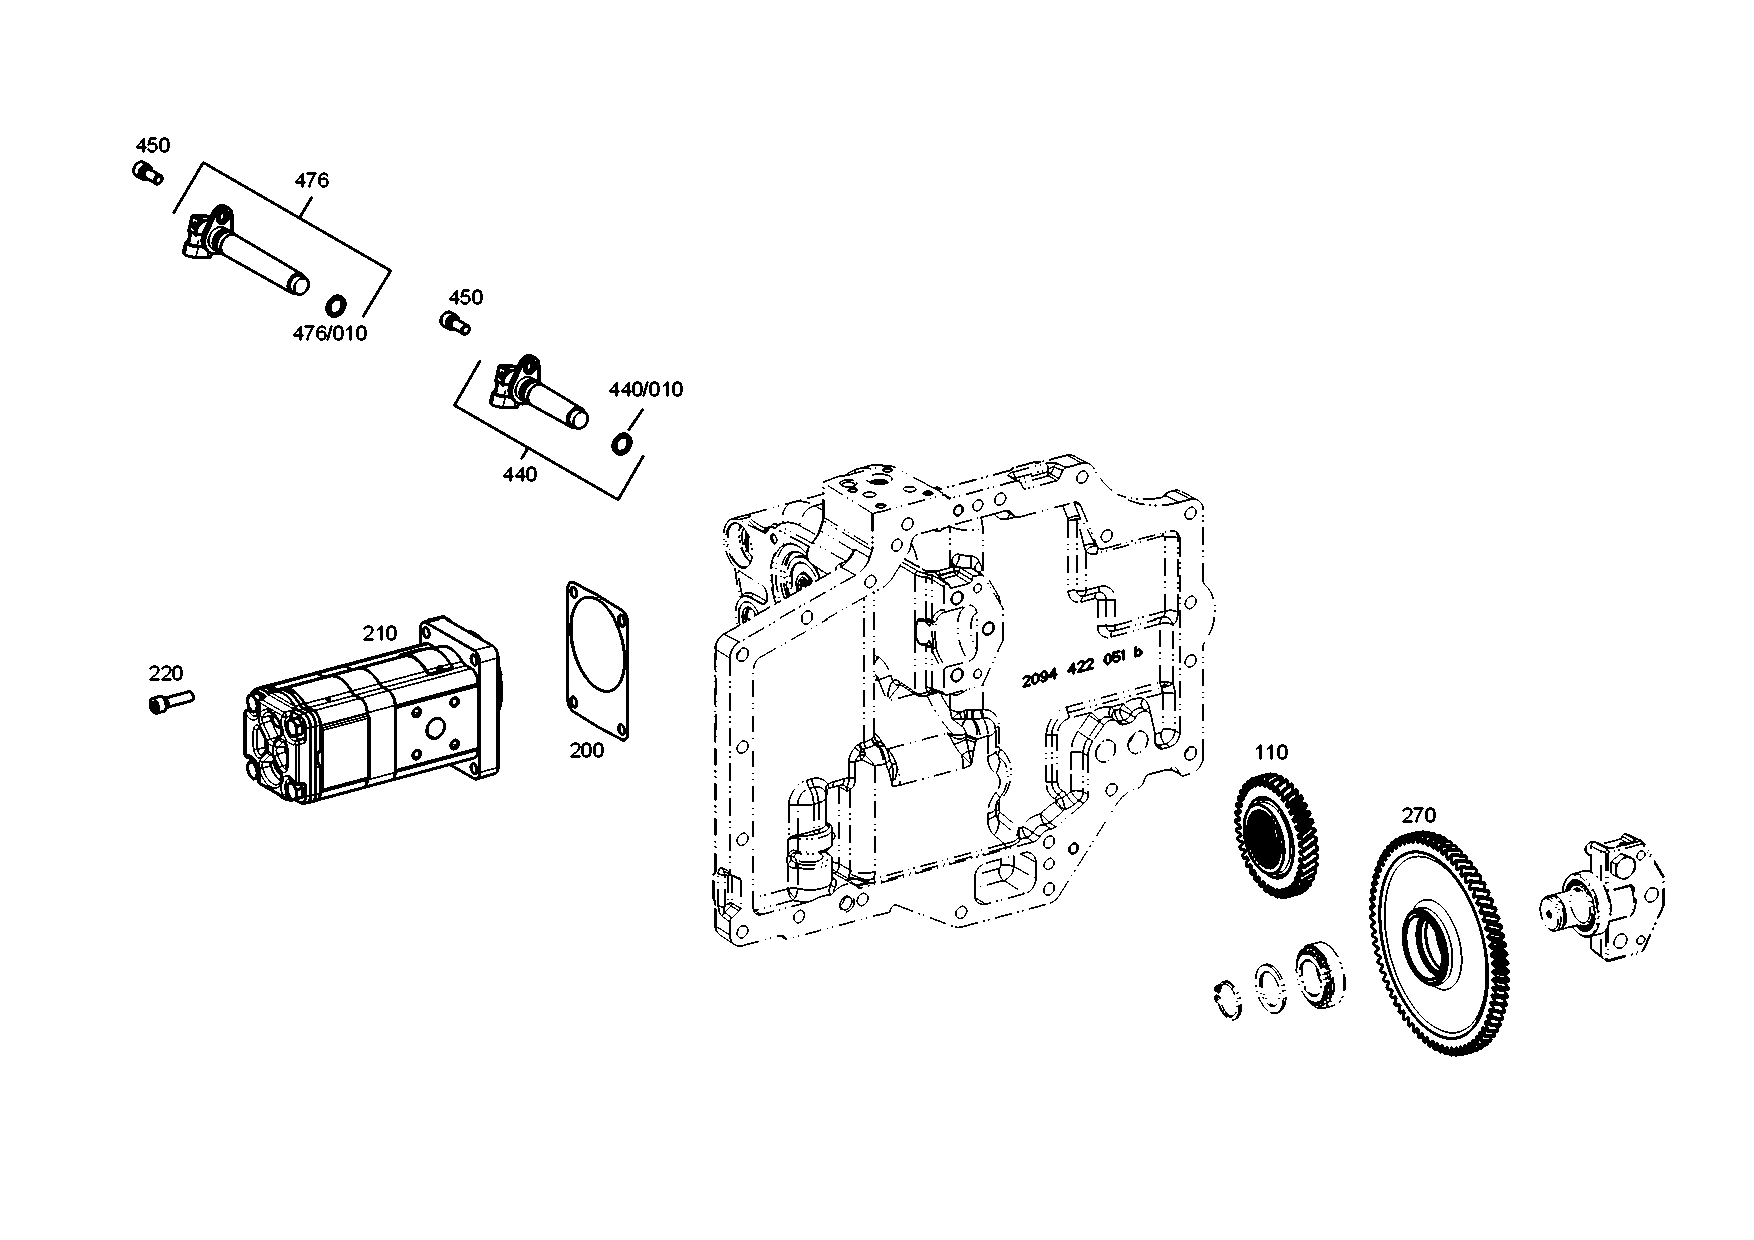 drawing for AGCO V35003000 - PUMP (figure 3)